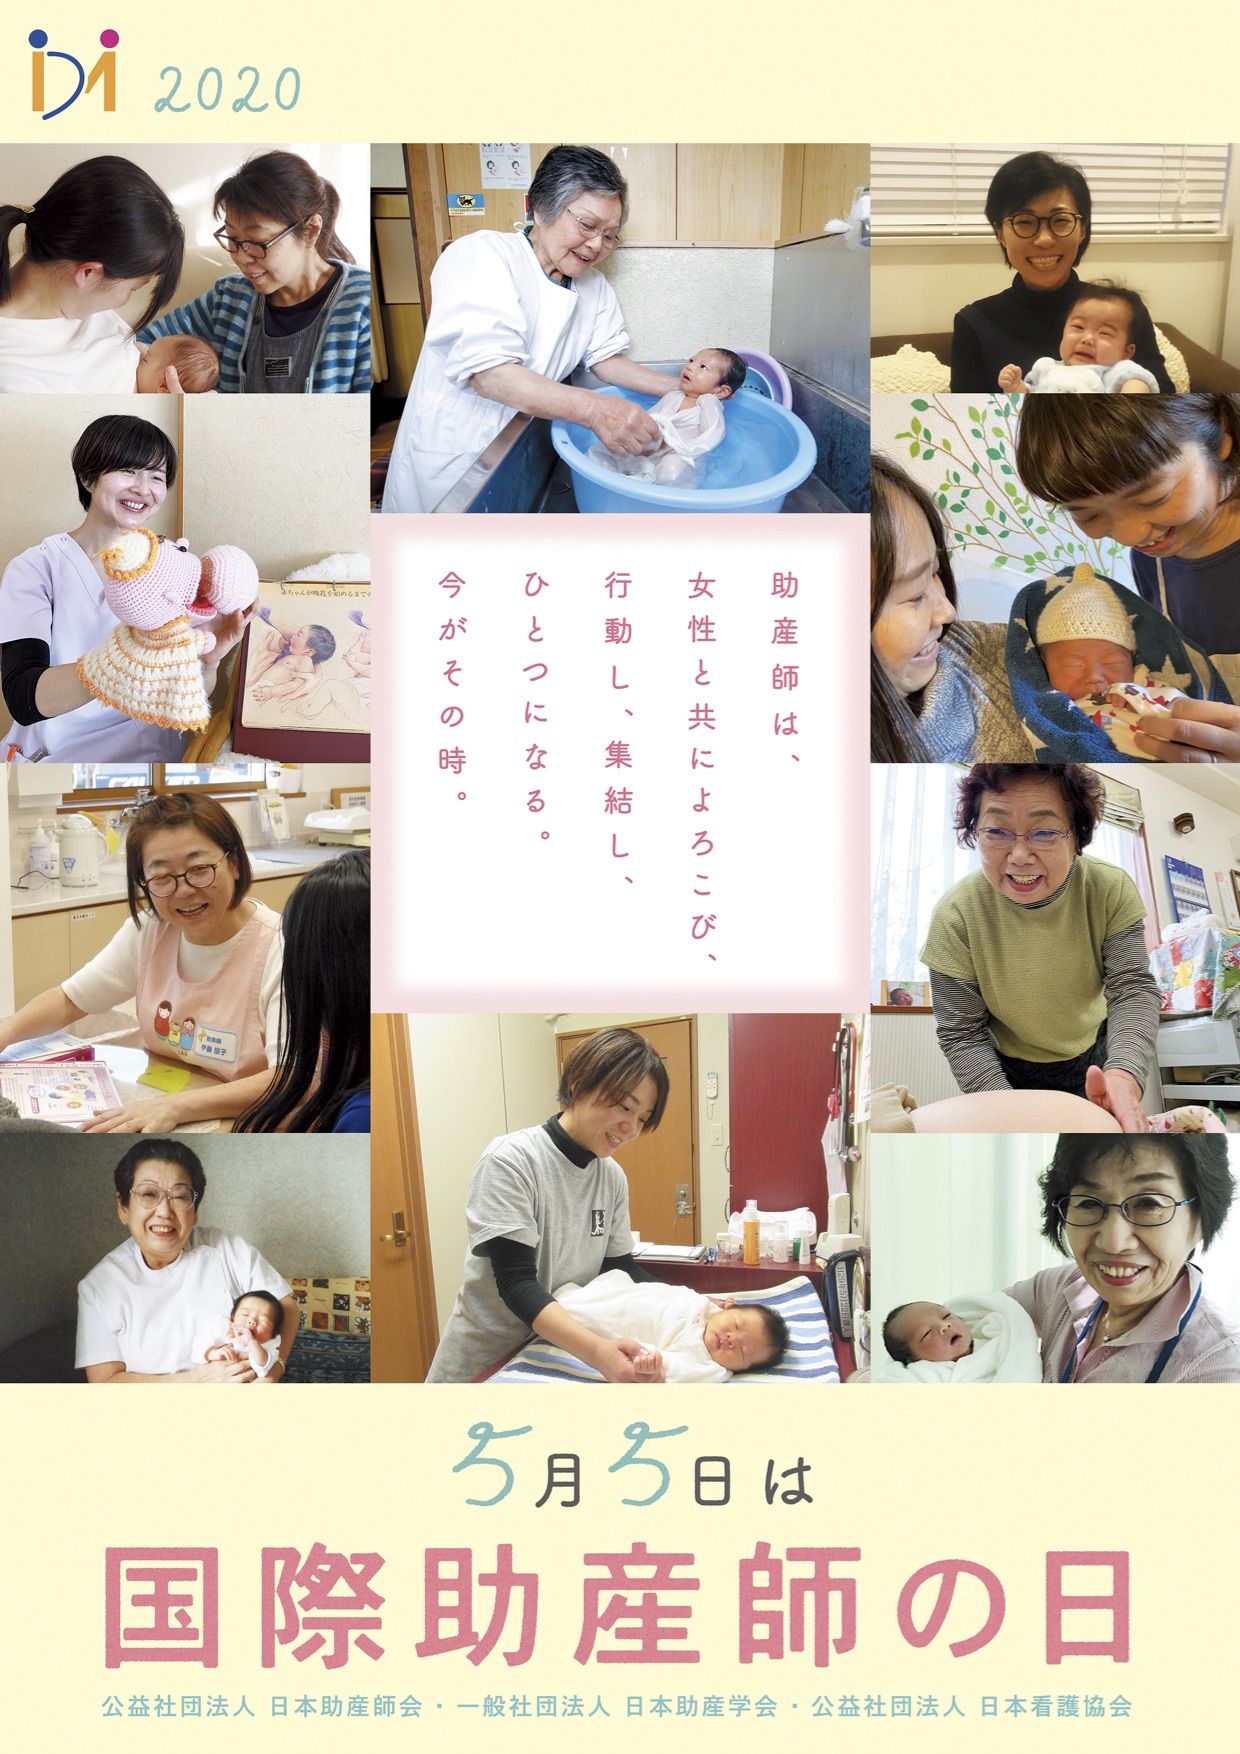 2020-　 Midwives with women:　celebrate, demonstrate, mobilize, unite　- our time is NOW!　(ICM-IDM2020テーマ）